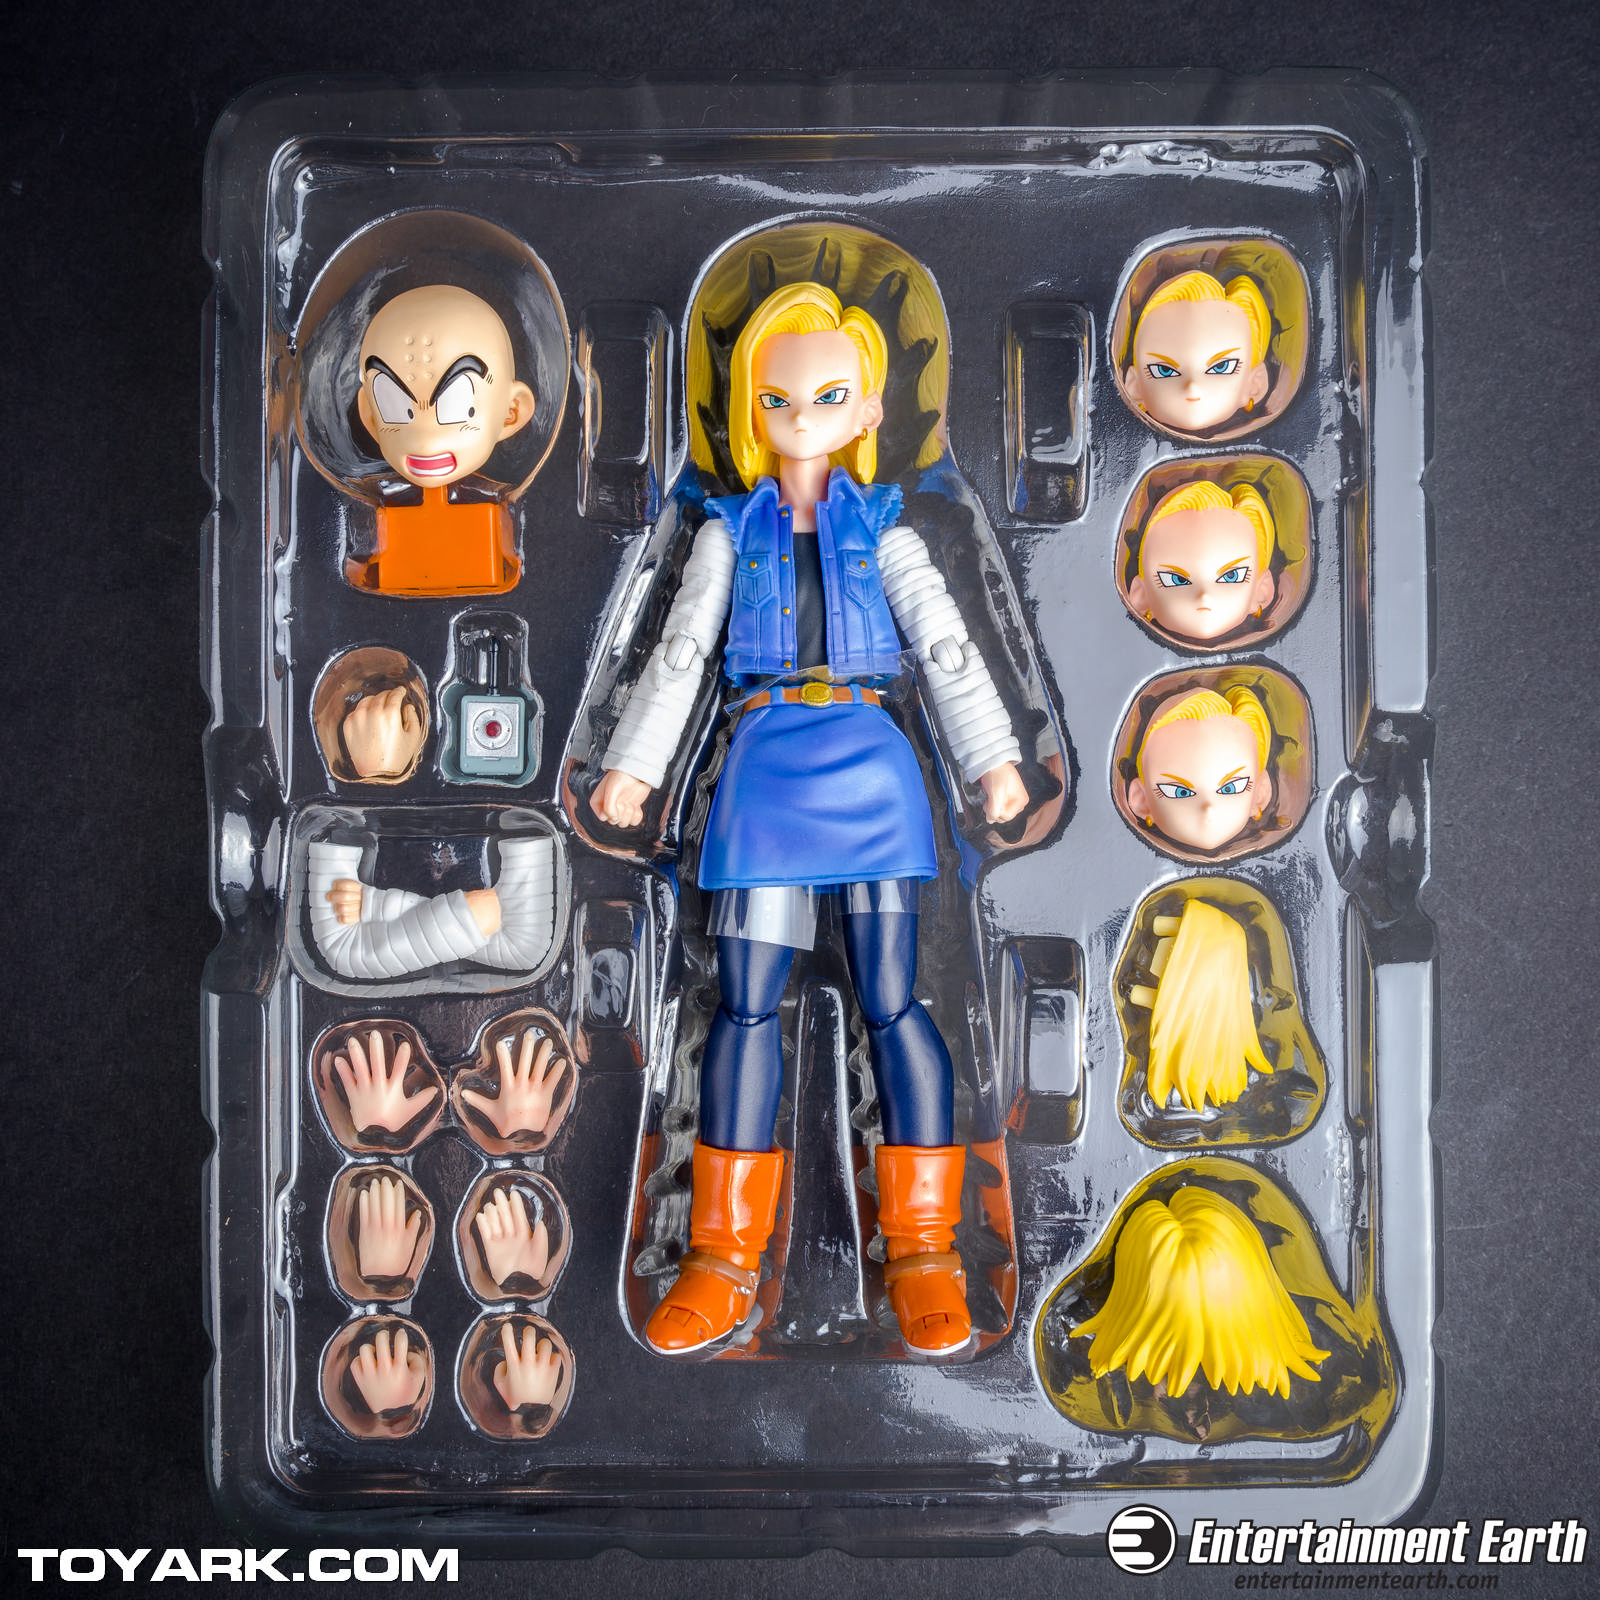 Figuarts-Android-18-03.jpg